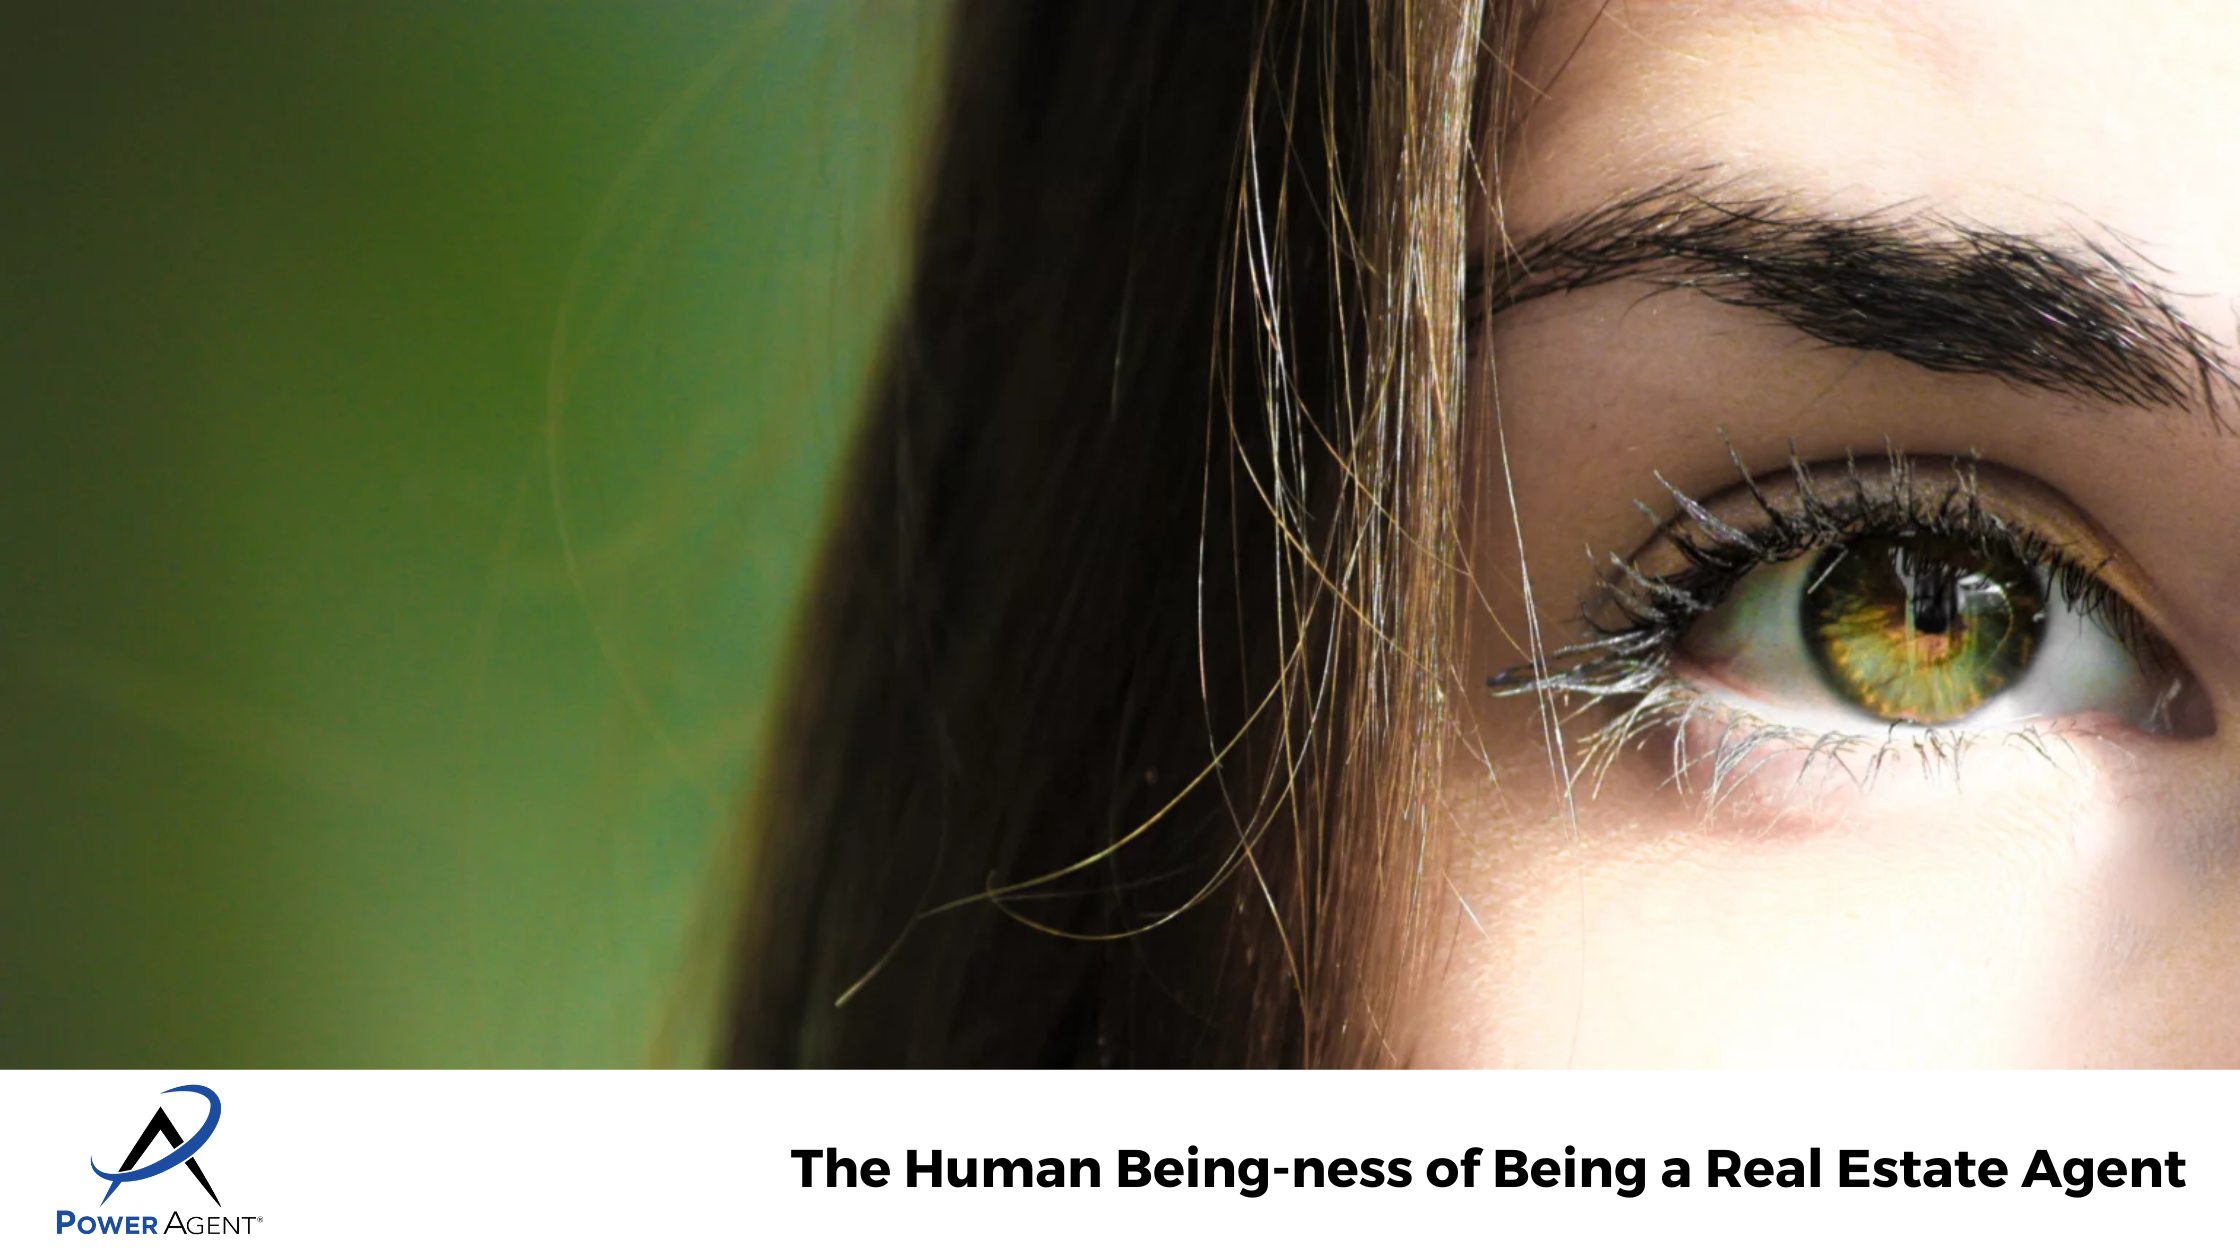 The Human Being-ness of Being a Real Estate Agent